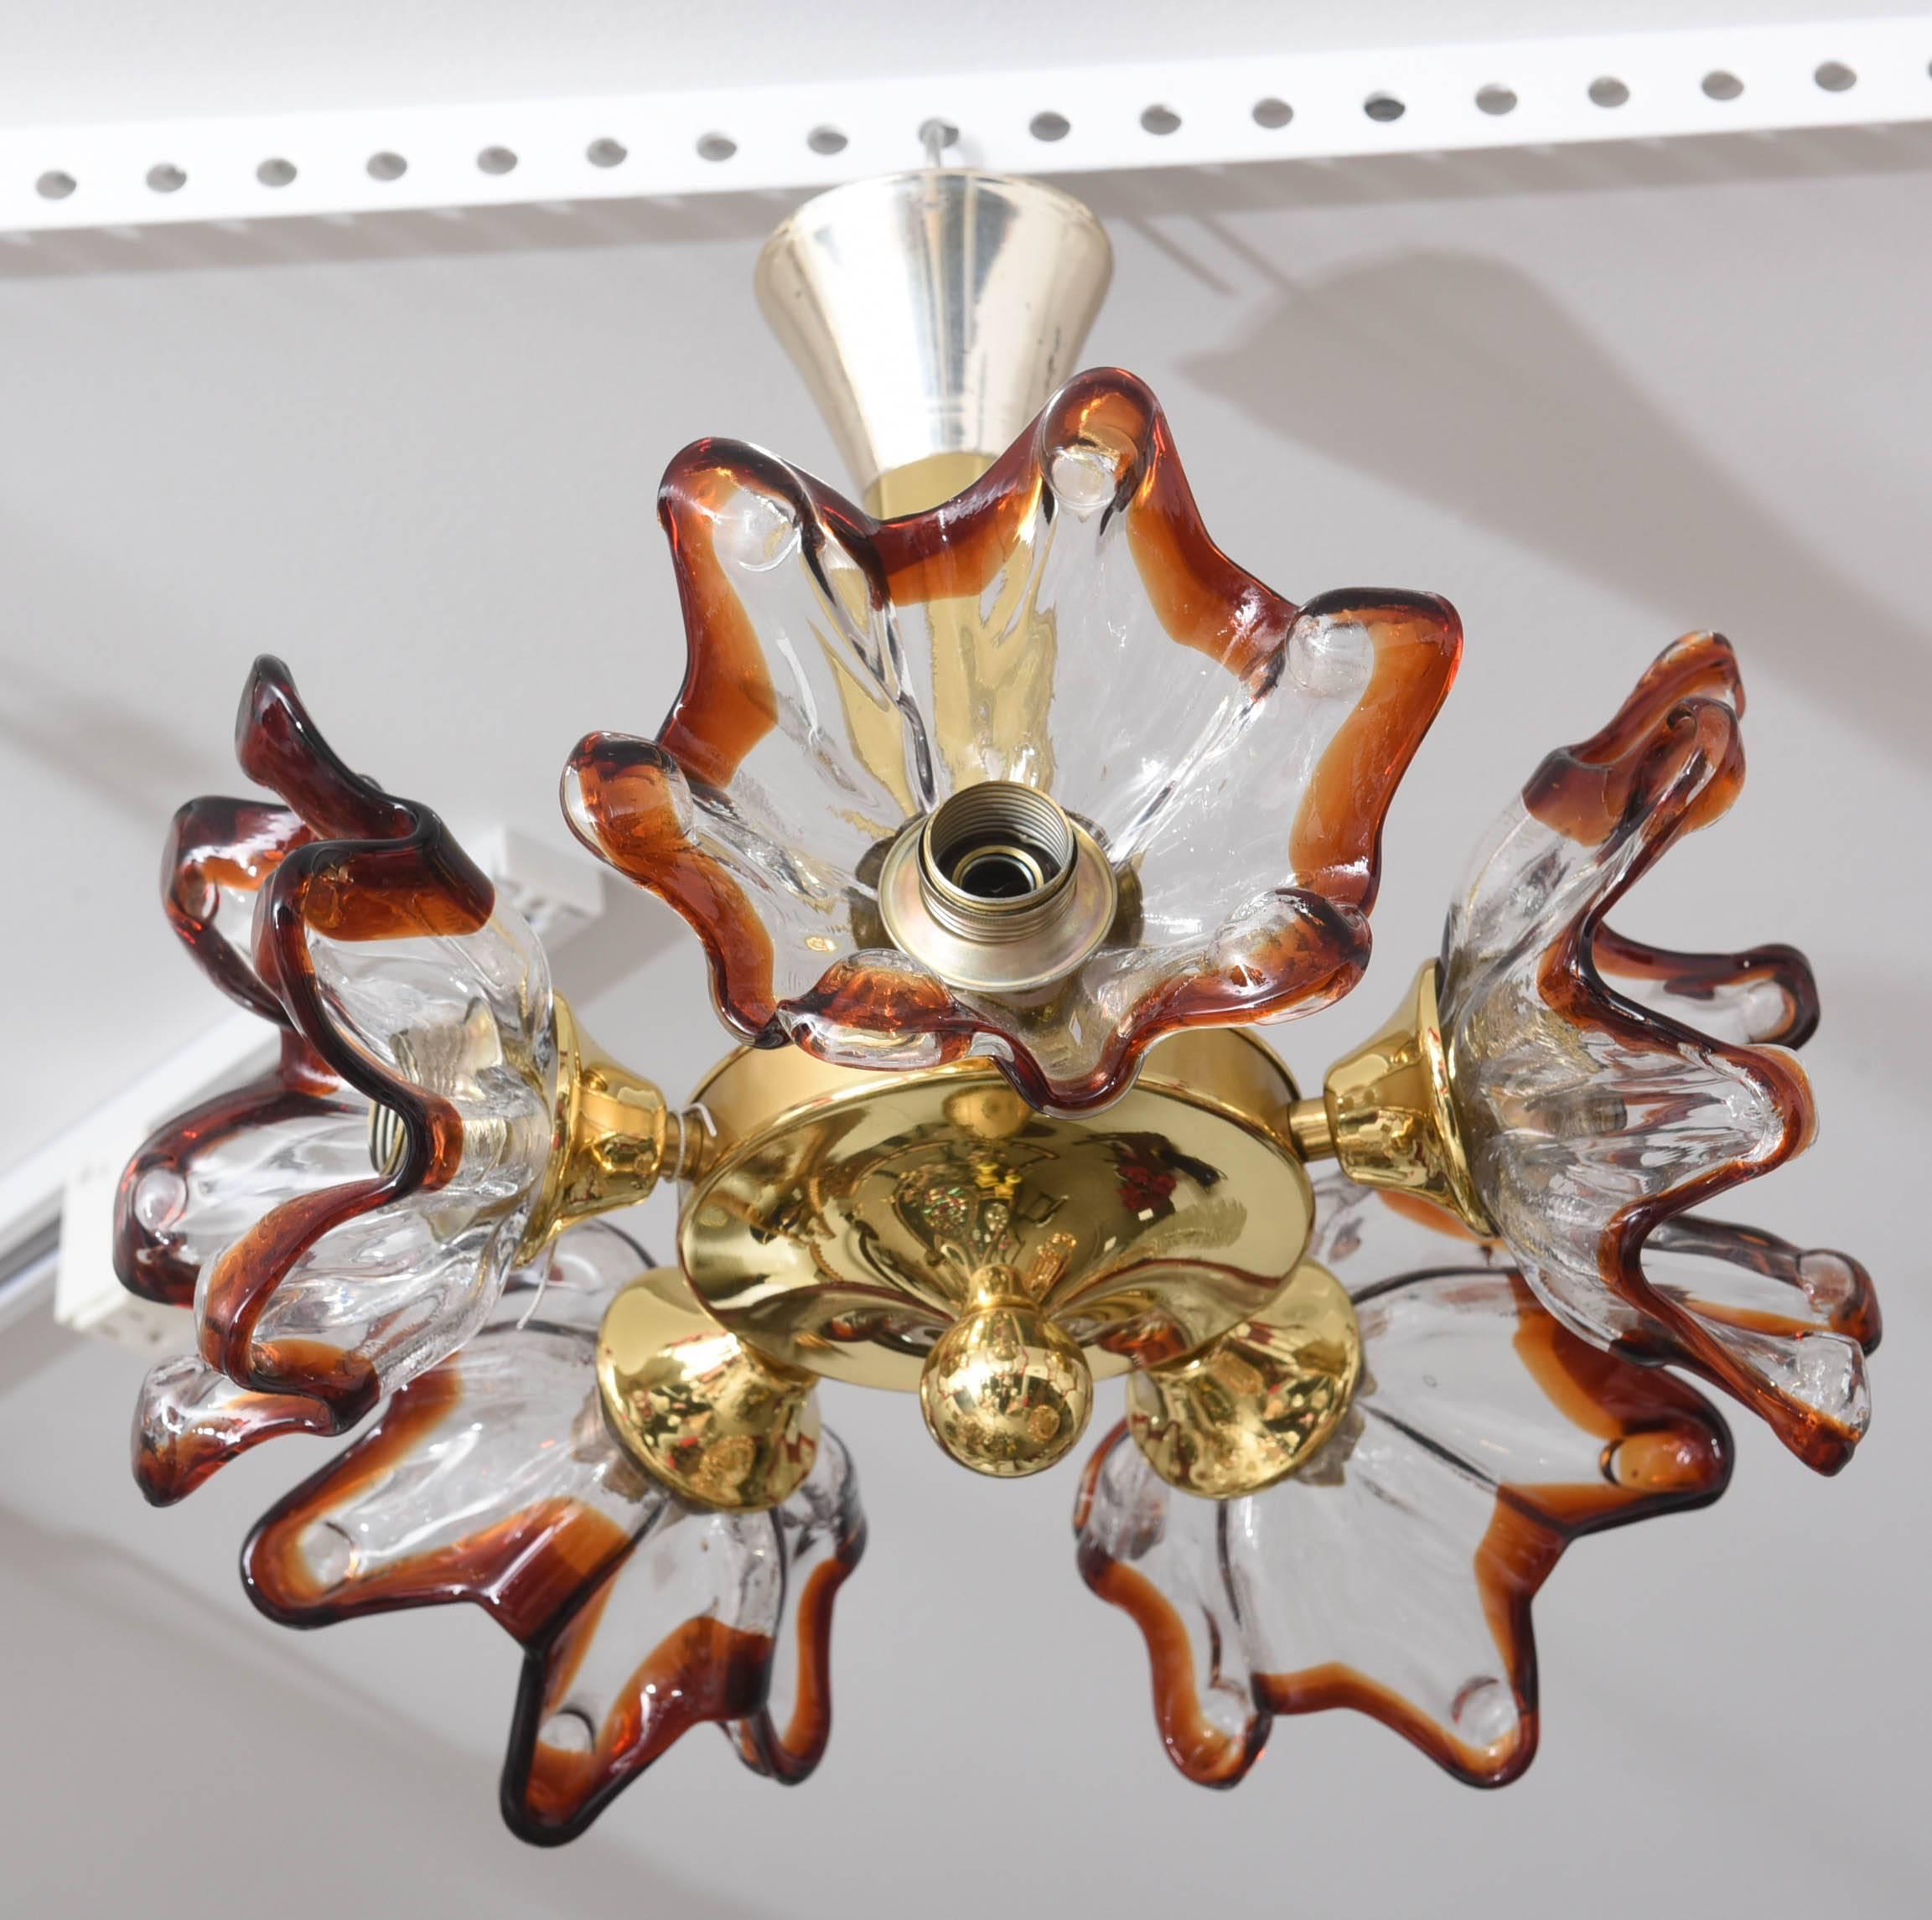 This amazing Mid-Century chandelier with its five Murano glass stylized floral blossoms in clear and amber-colors was created by the iconic firm Mazzega in the 1960s. The blossoms approximately measures 7" diameter x 7" depth.

Note: